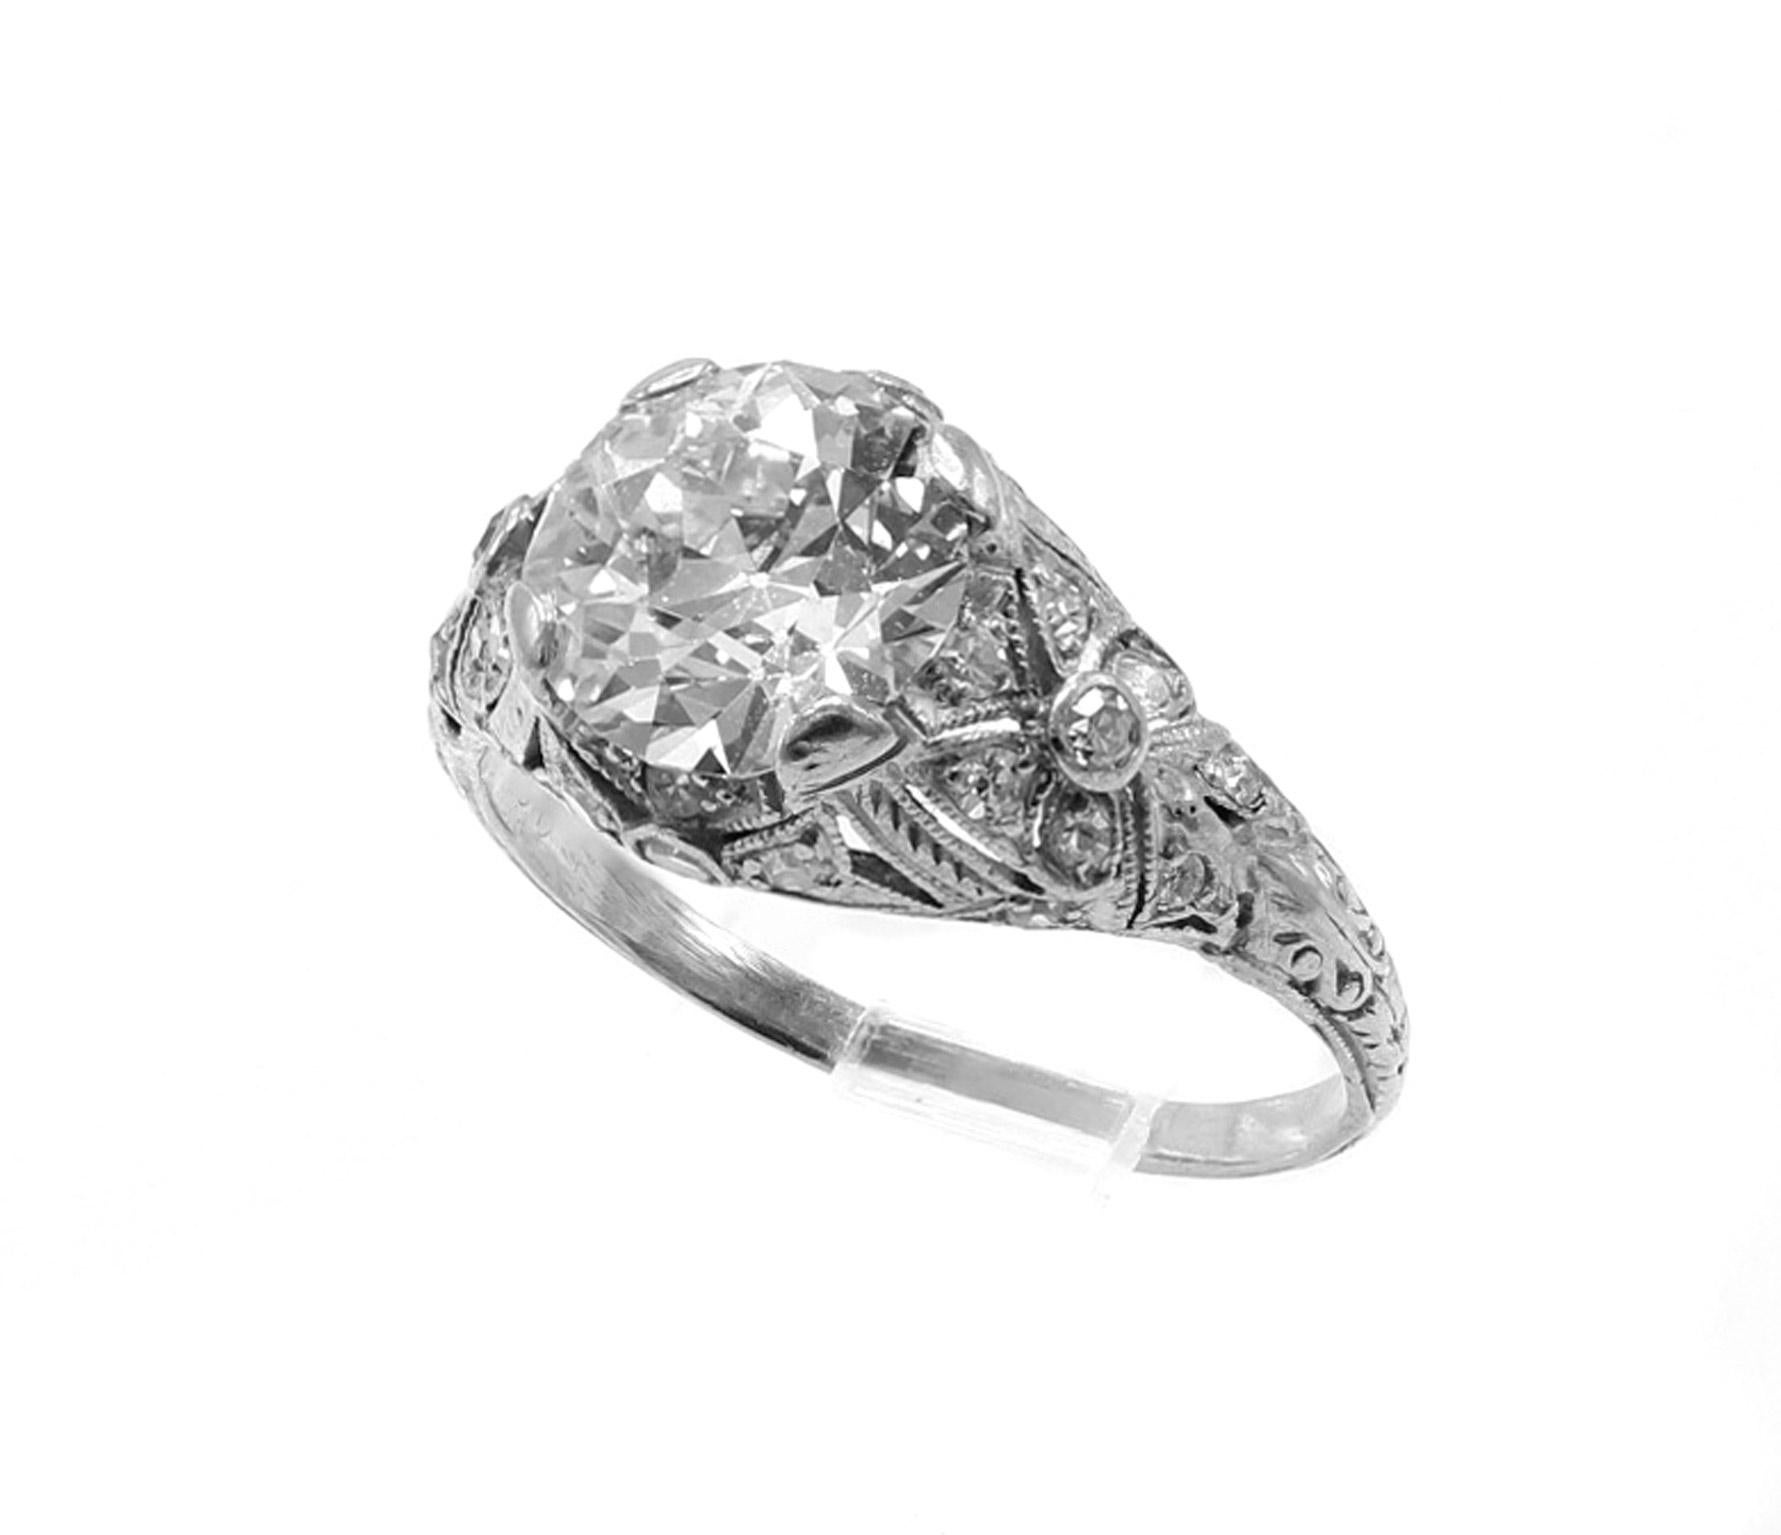 Art Deco 2.13 Carat Old European Cut Platinum Diamond Engagement Ring In Good Condition For Sale In New York, NY